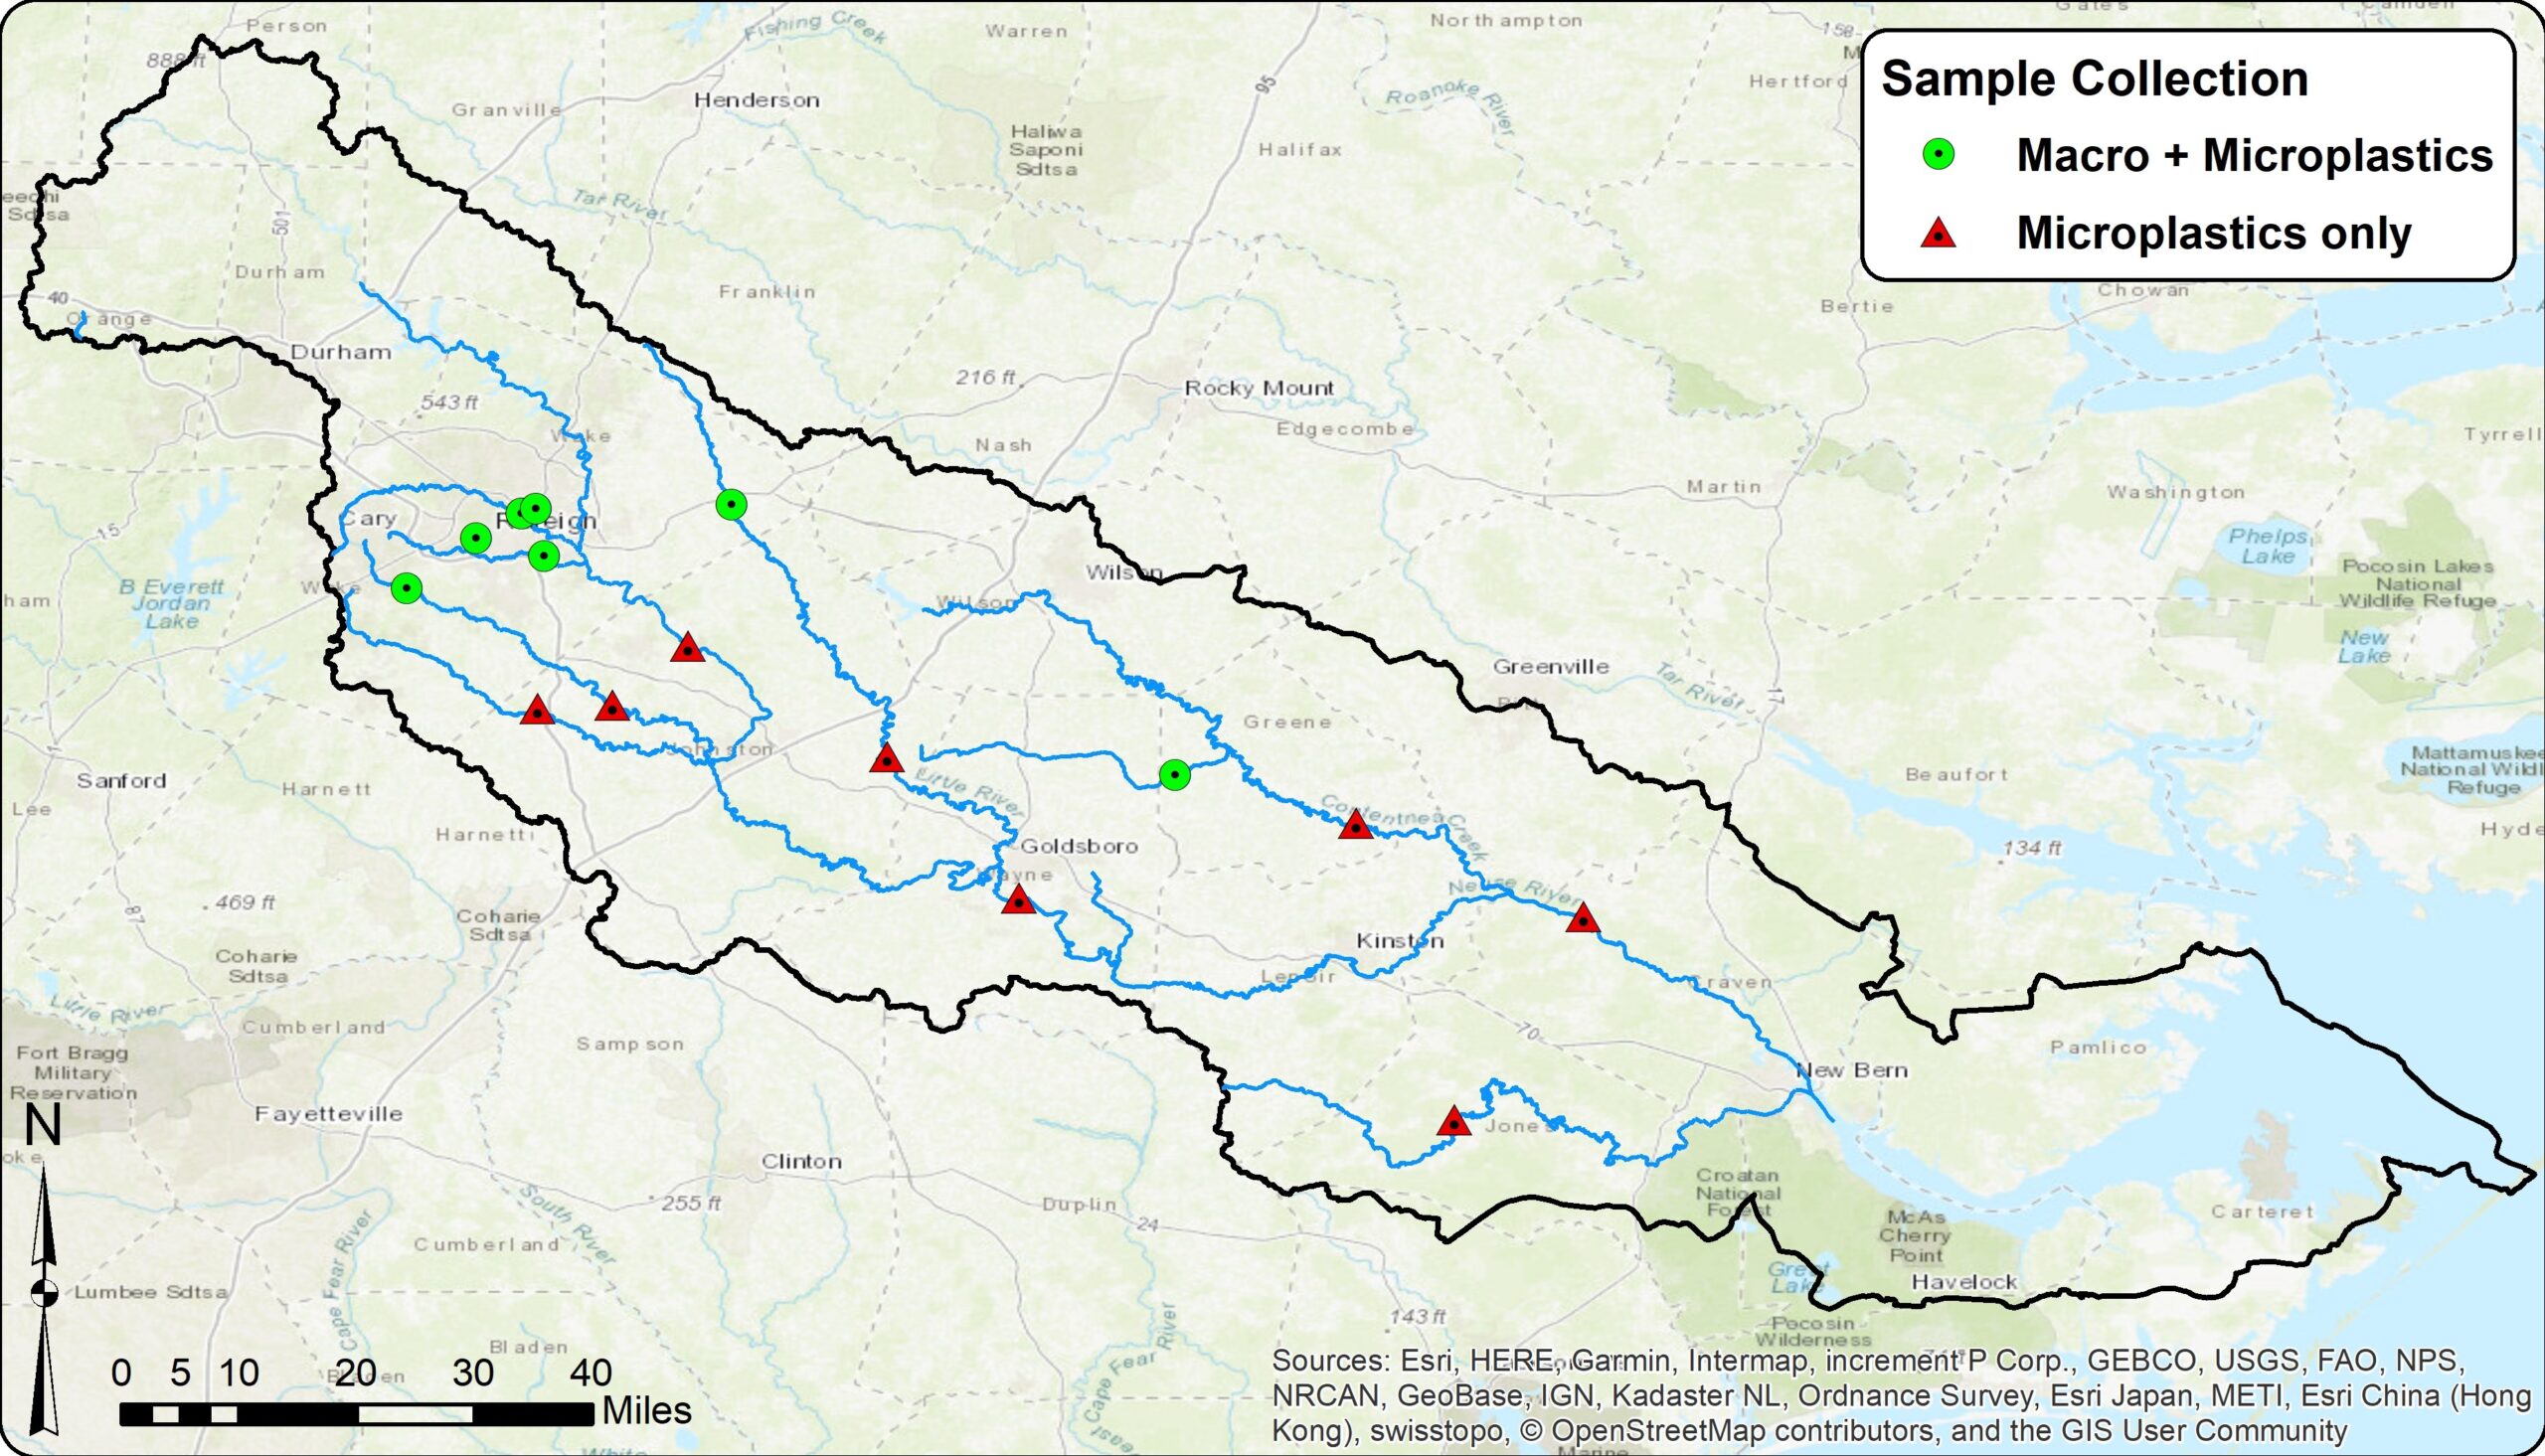 A map featuring 15 sites within the Neuse River basin that are part of a study into plastic loading into Pamlico Sound. 